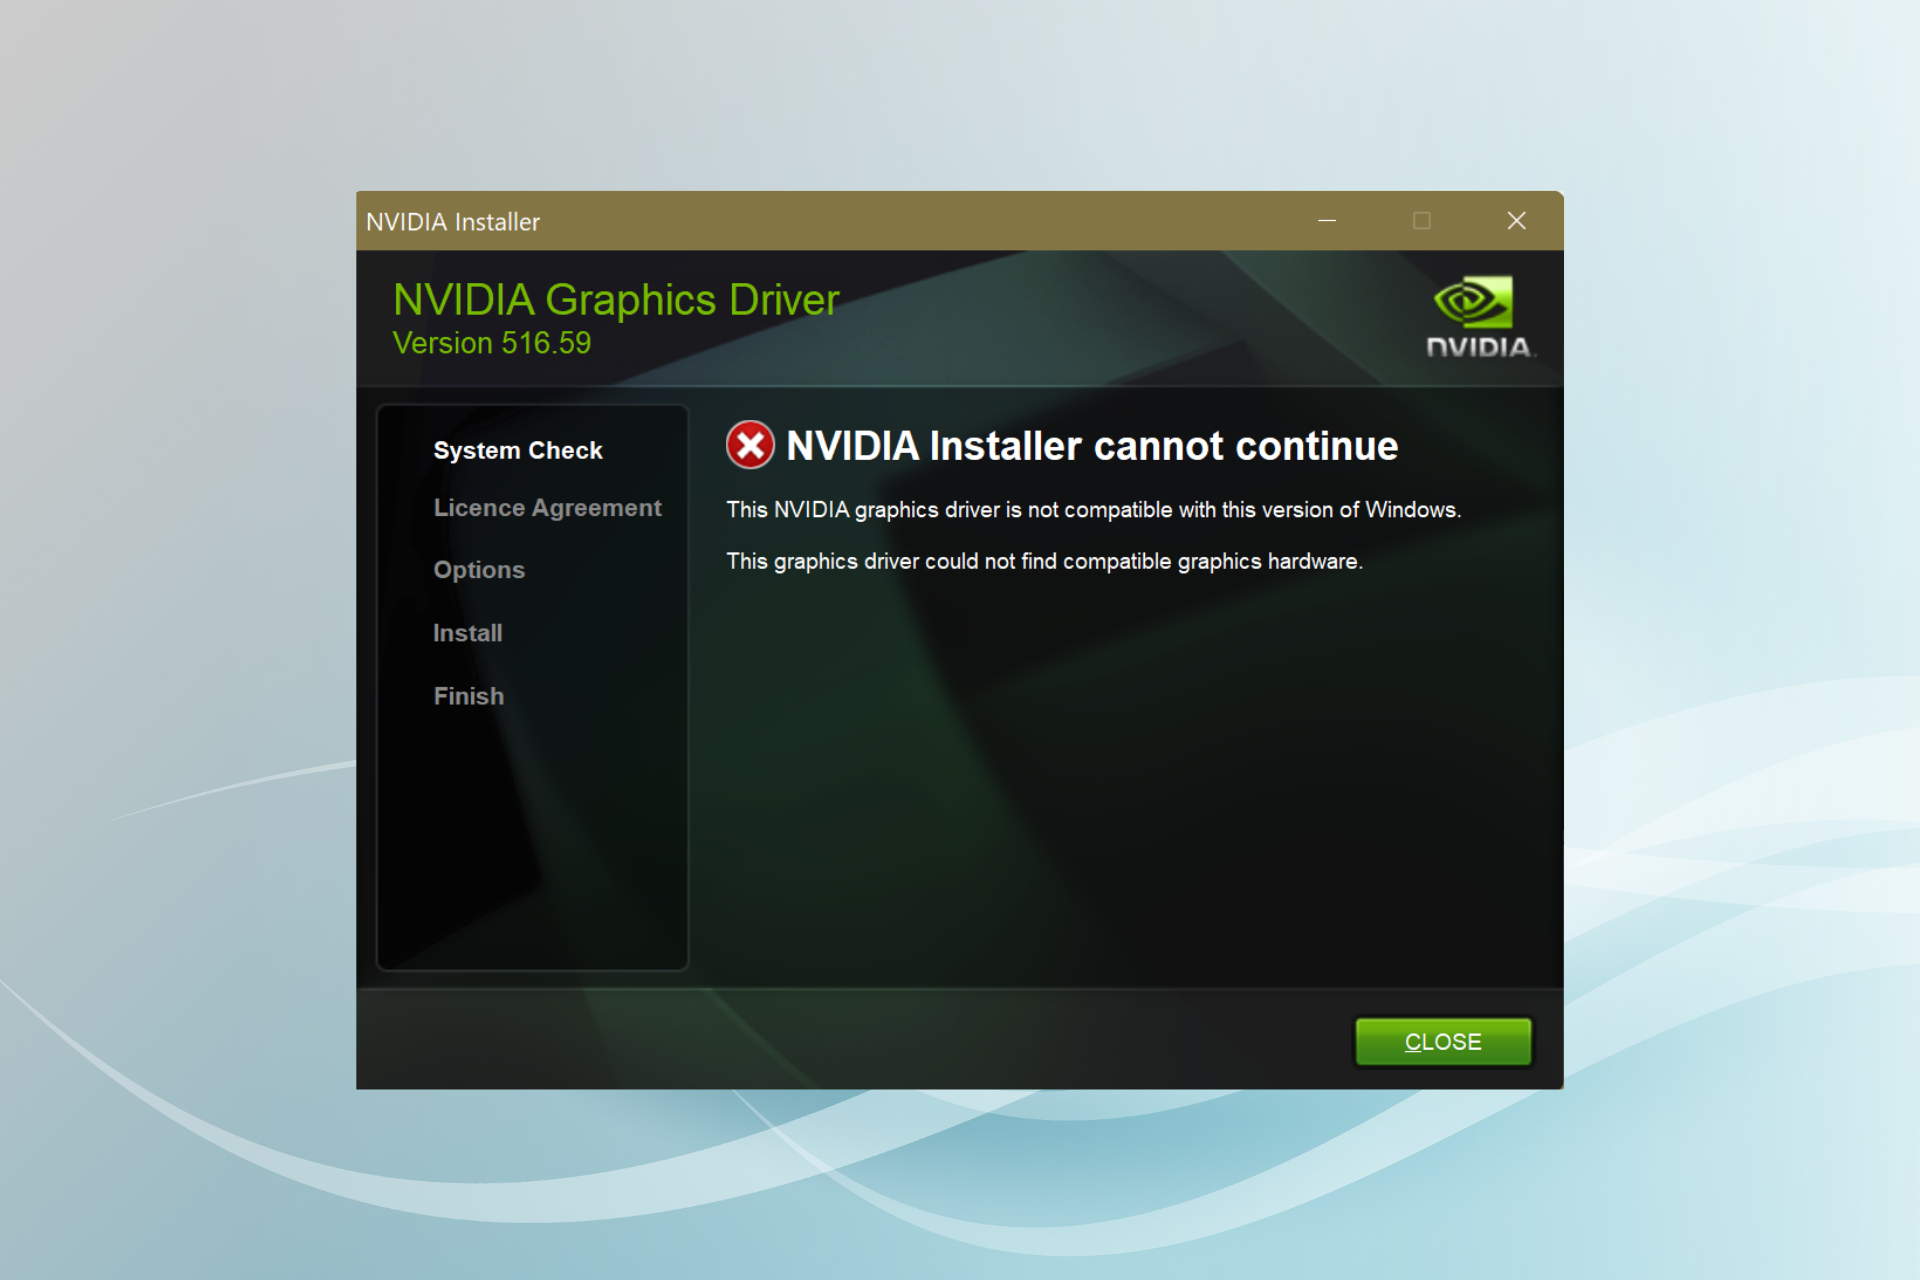 This nvidia driver is not compatible with this version of windows error